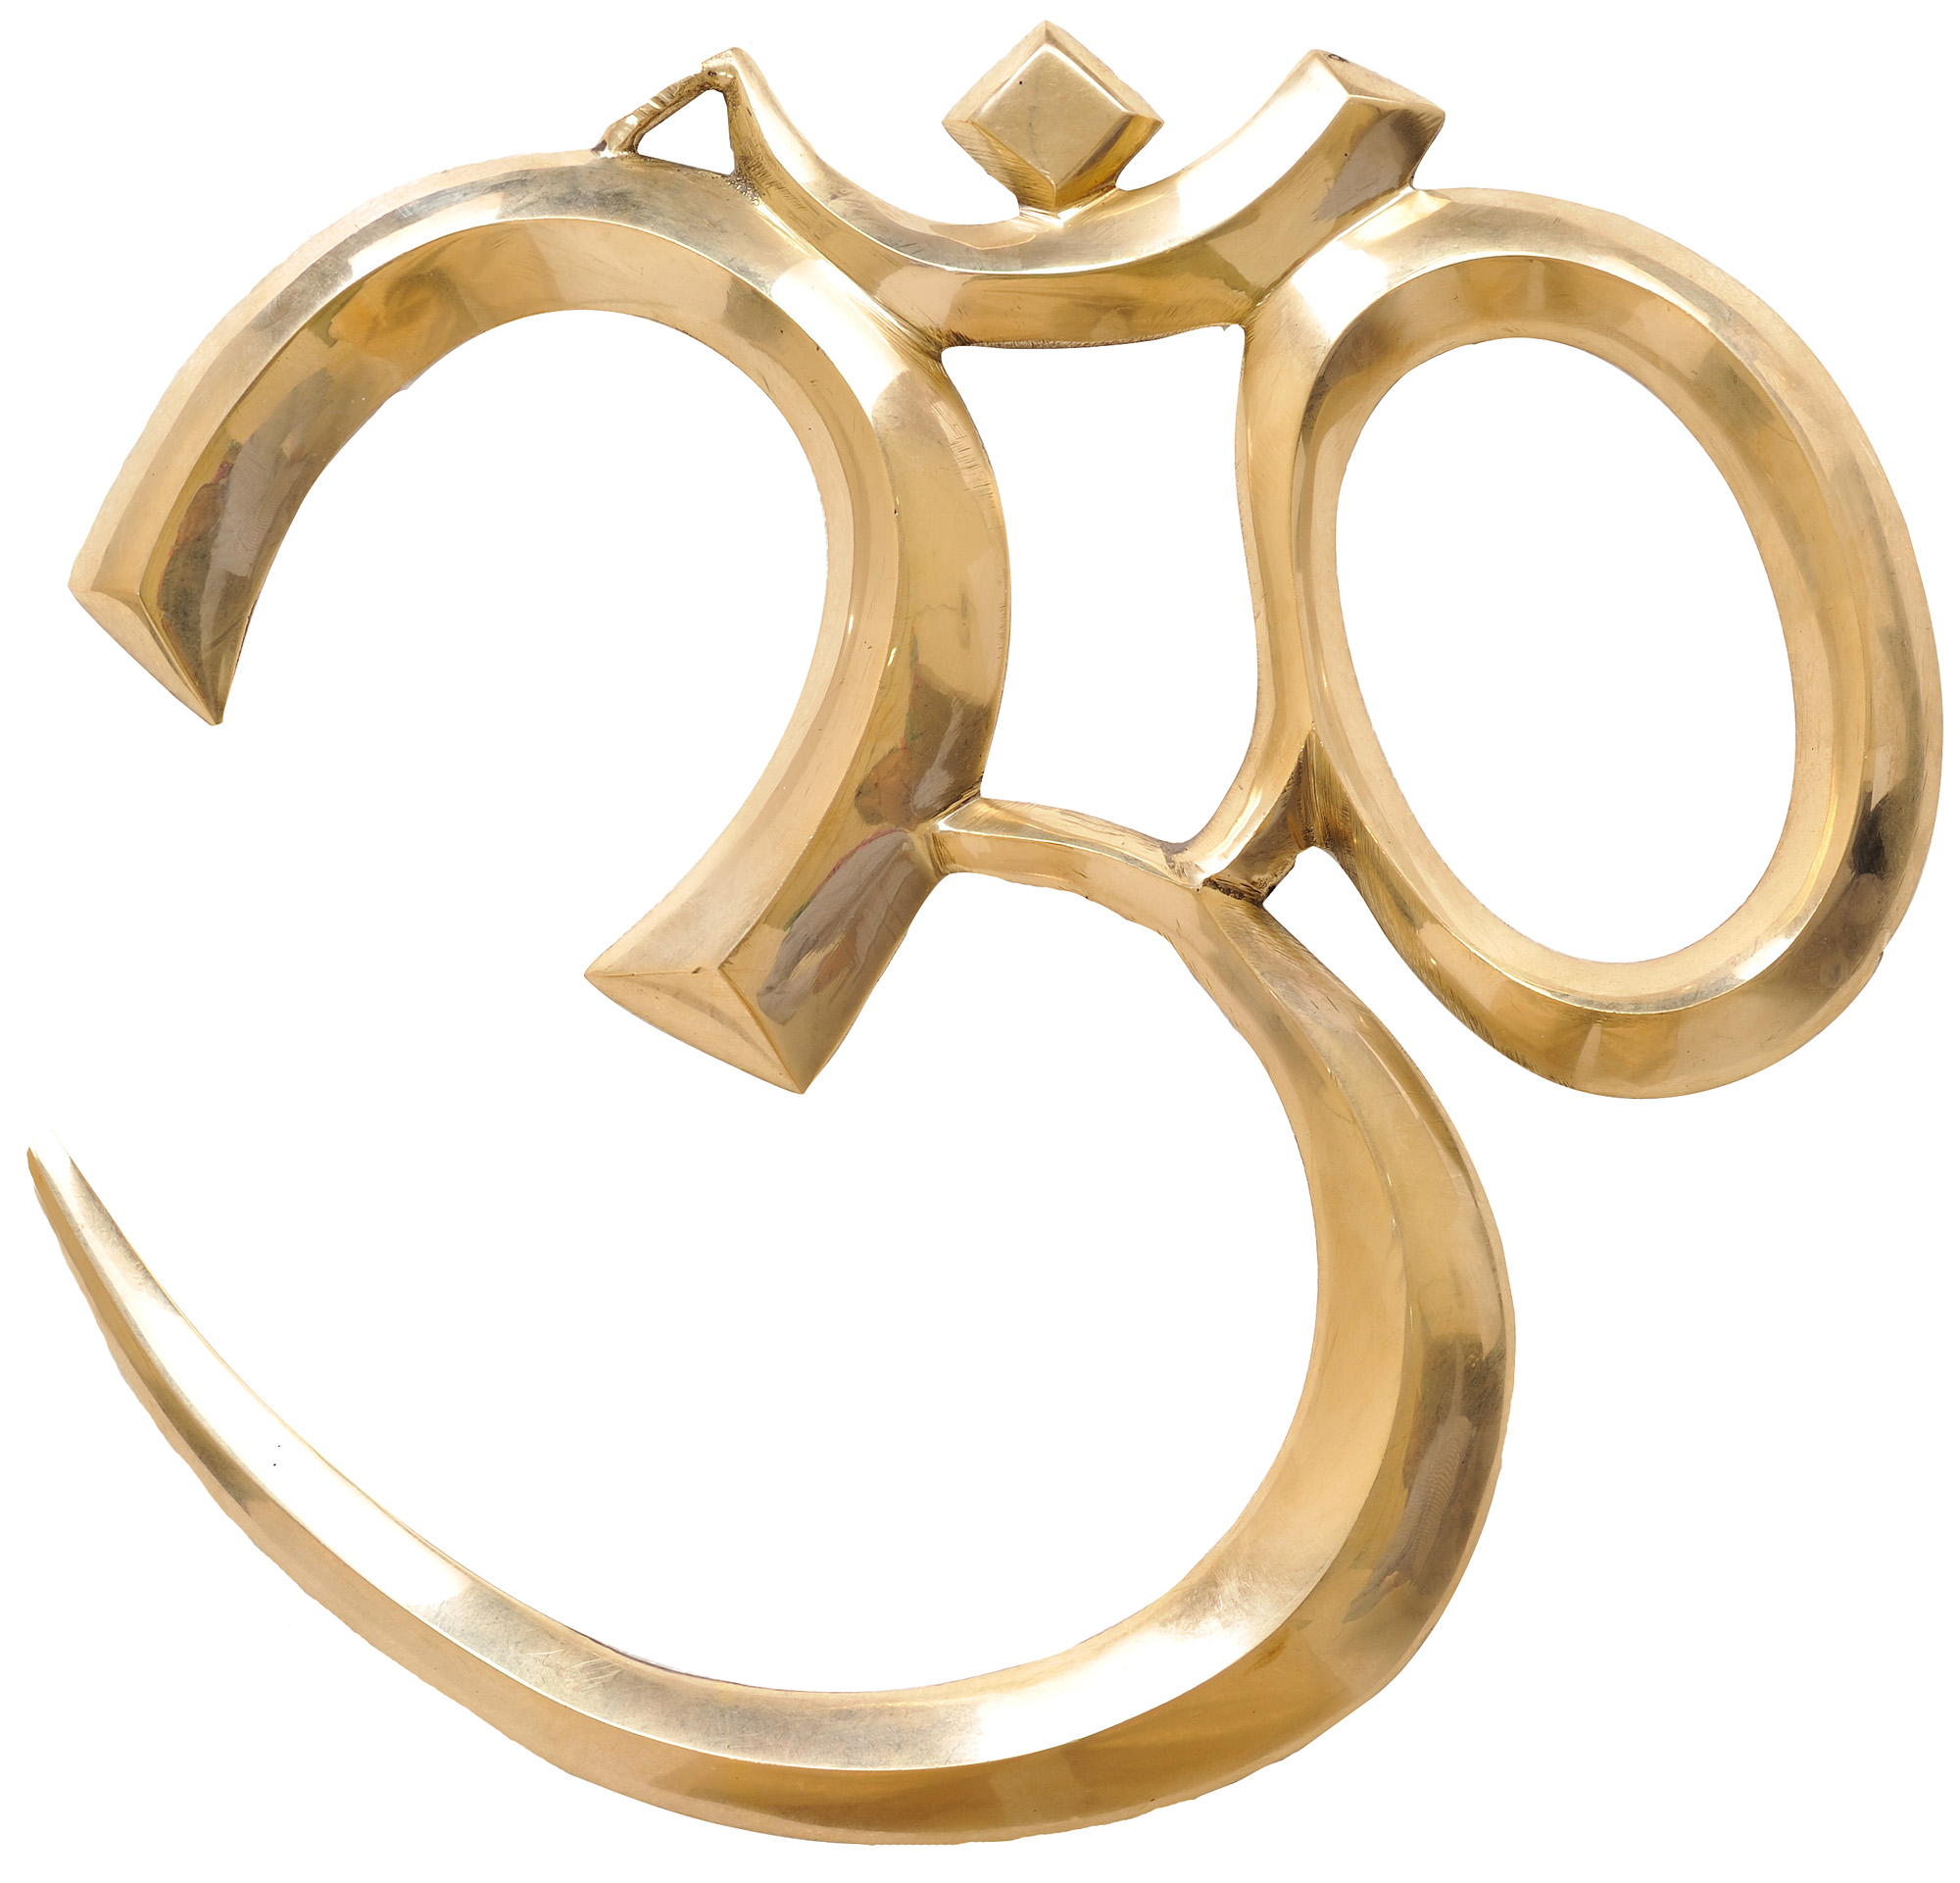 Om - An Inquiry into its Aesthetics, Mysticism, and Philosophy